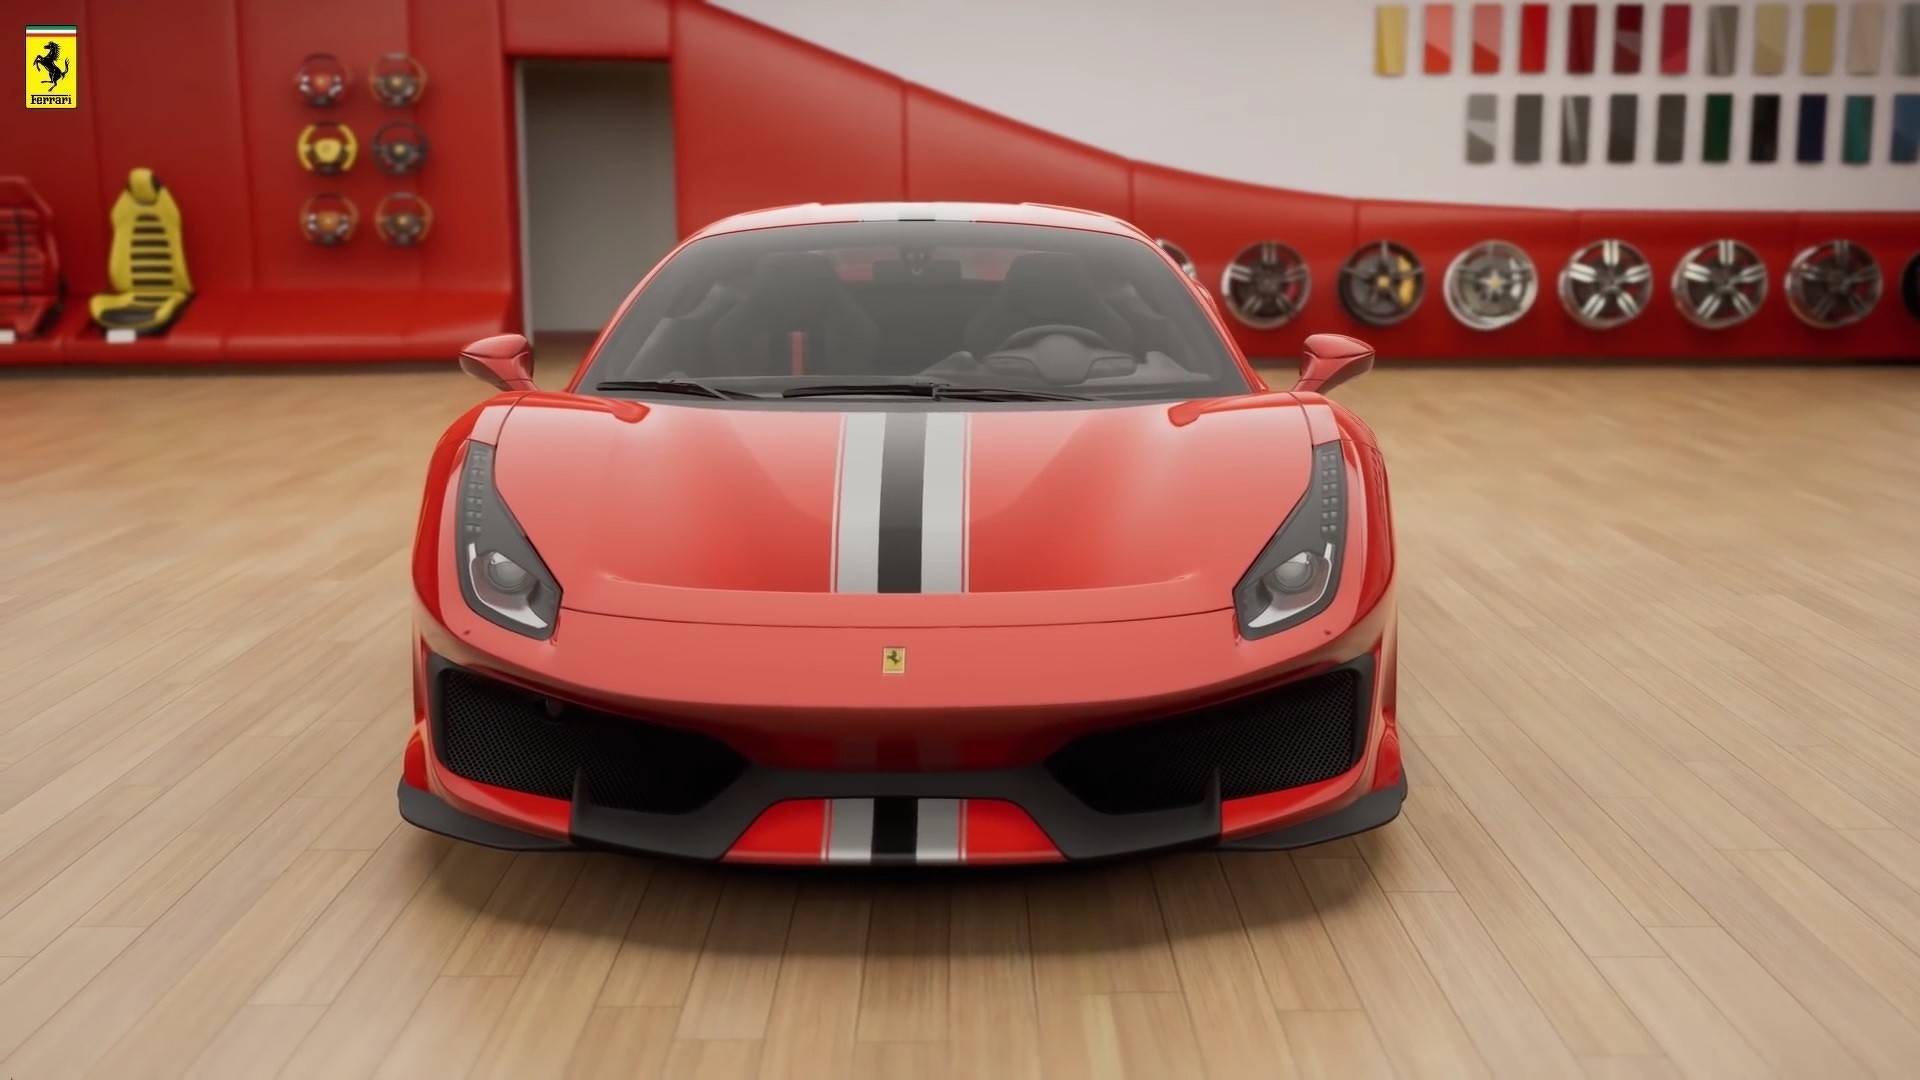 Ferrari Pista Leaks Out To Reveal Its Aggressive Body